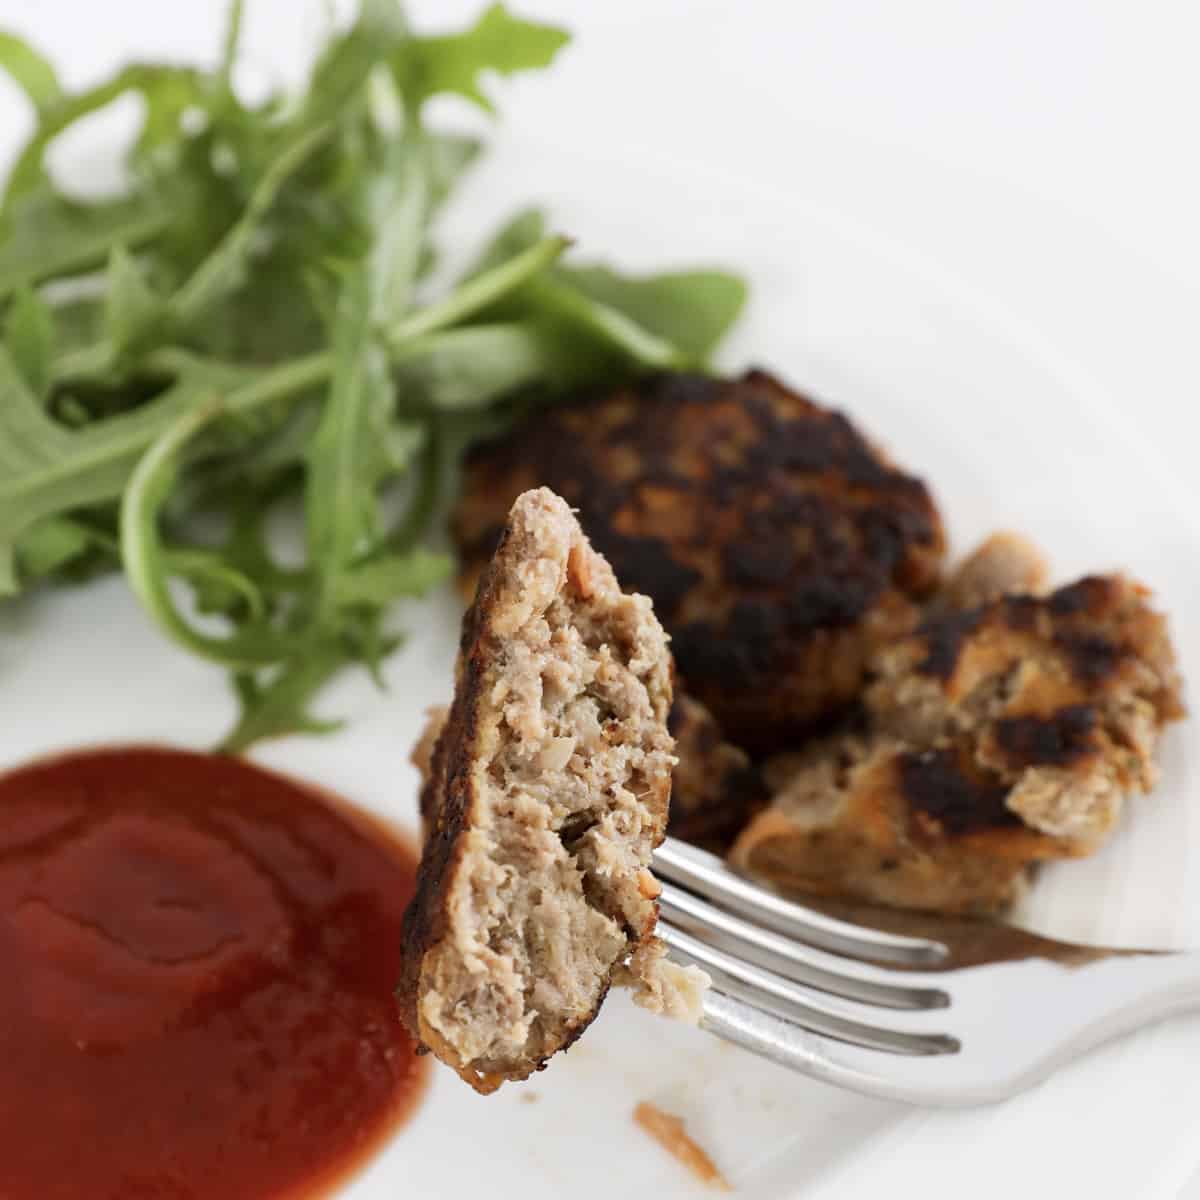 A beef rissole on a fork in front of rocket and sauce.